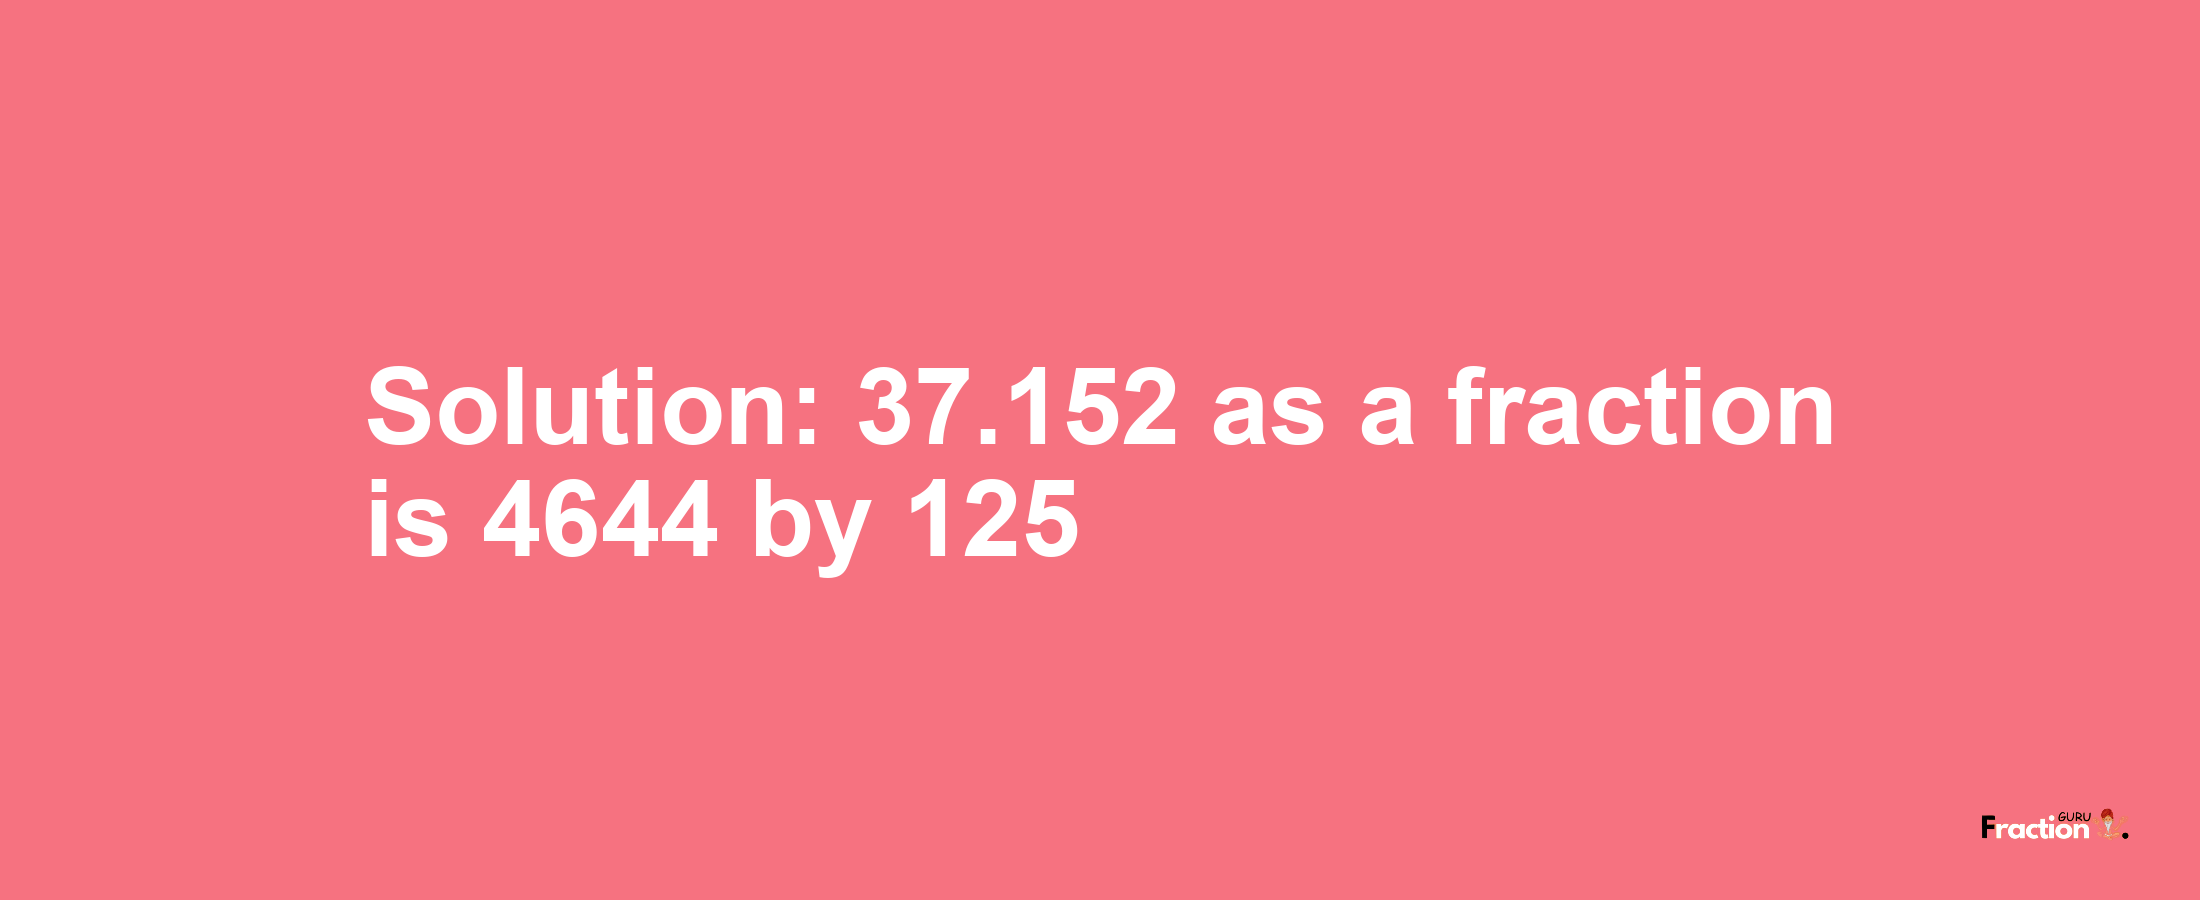 Solution:37.152 as a fraction is 4644/125